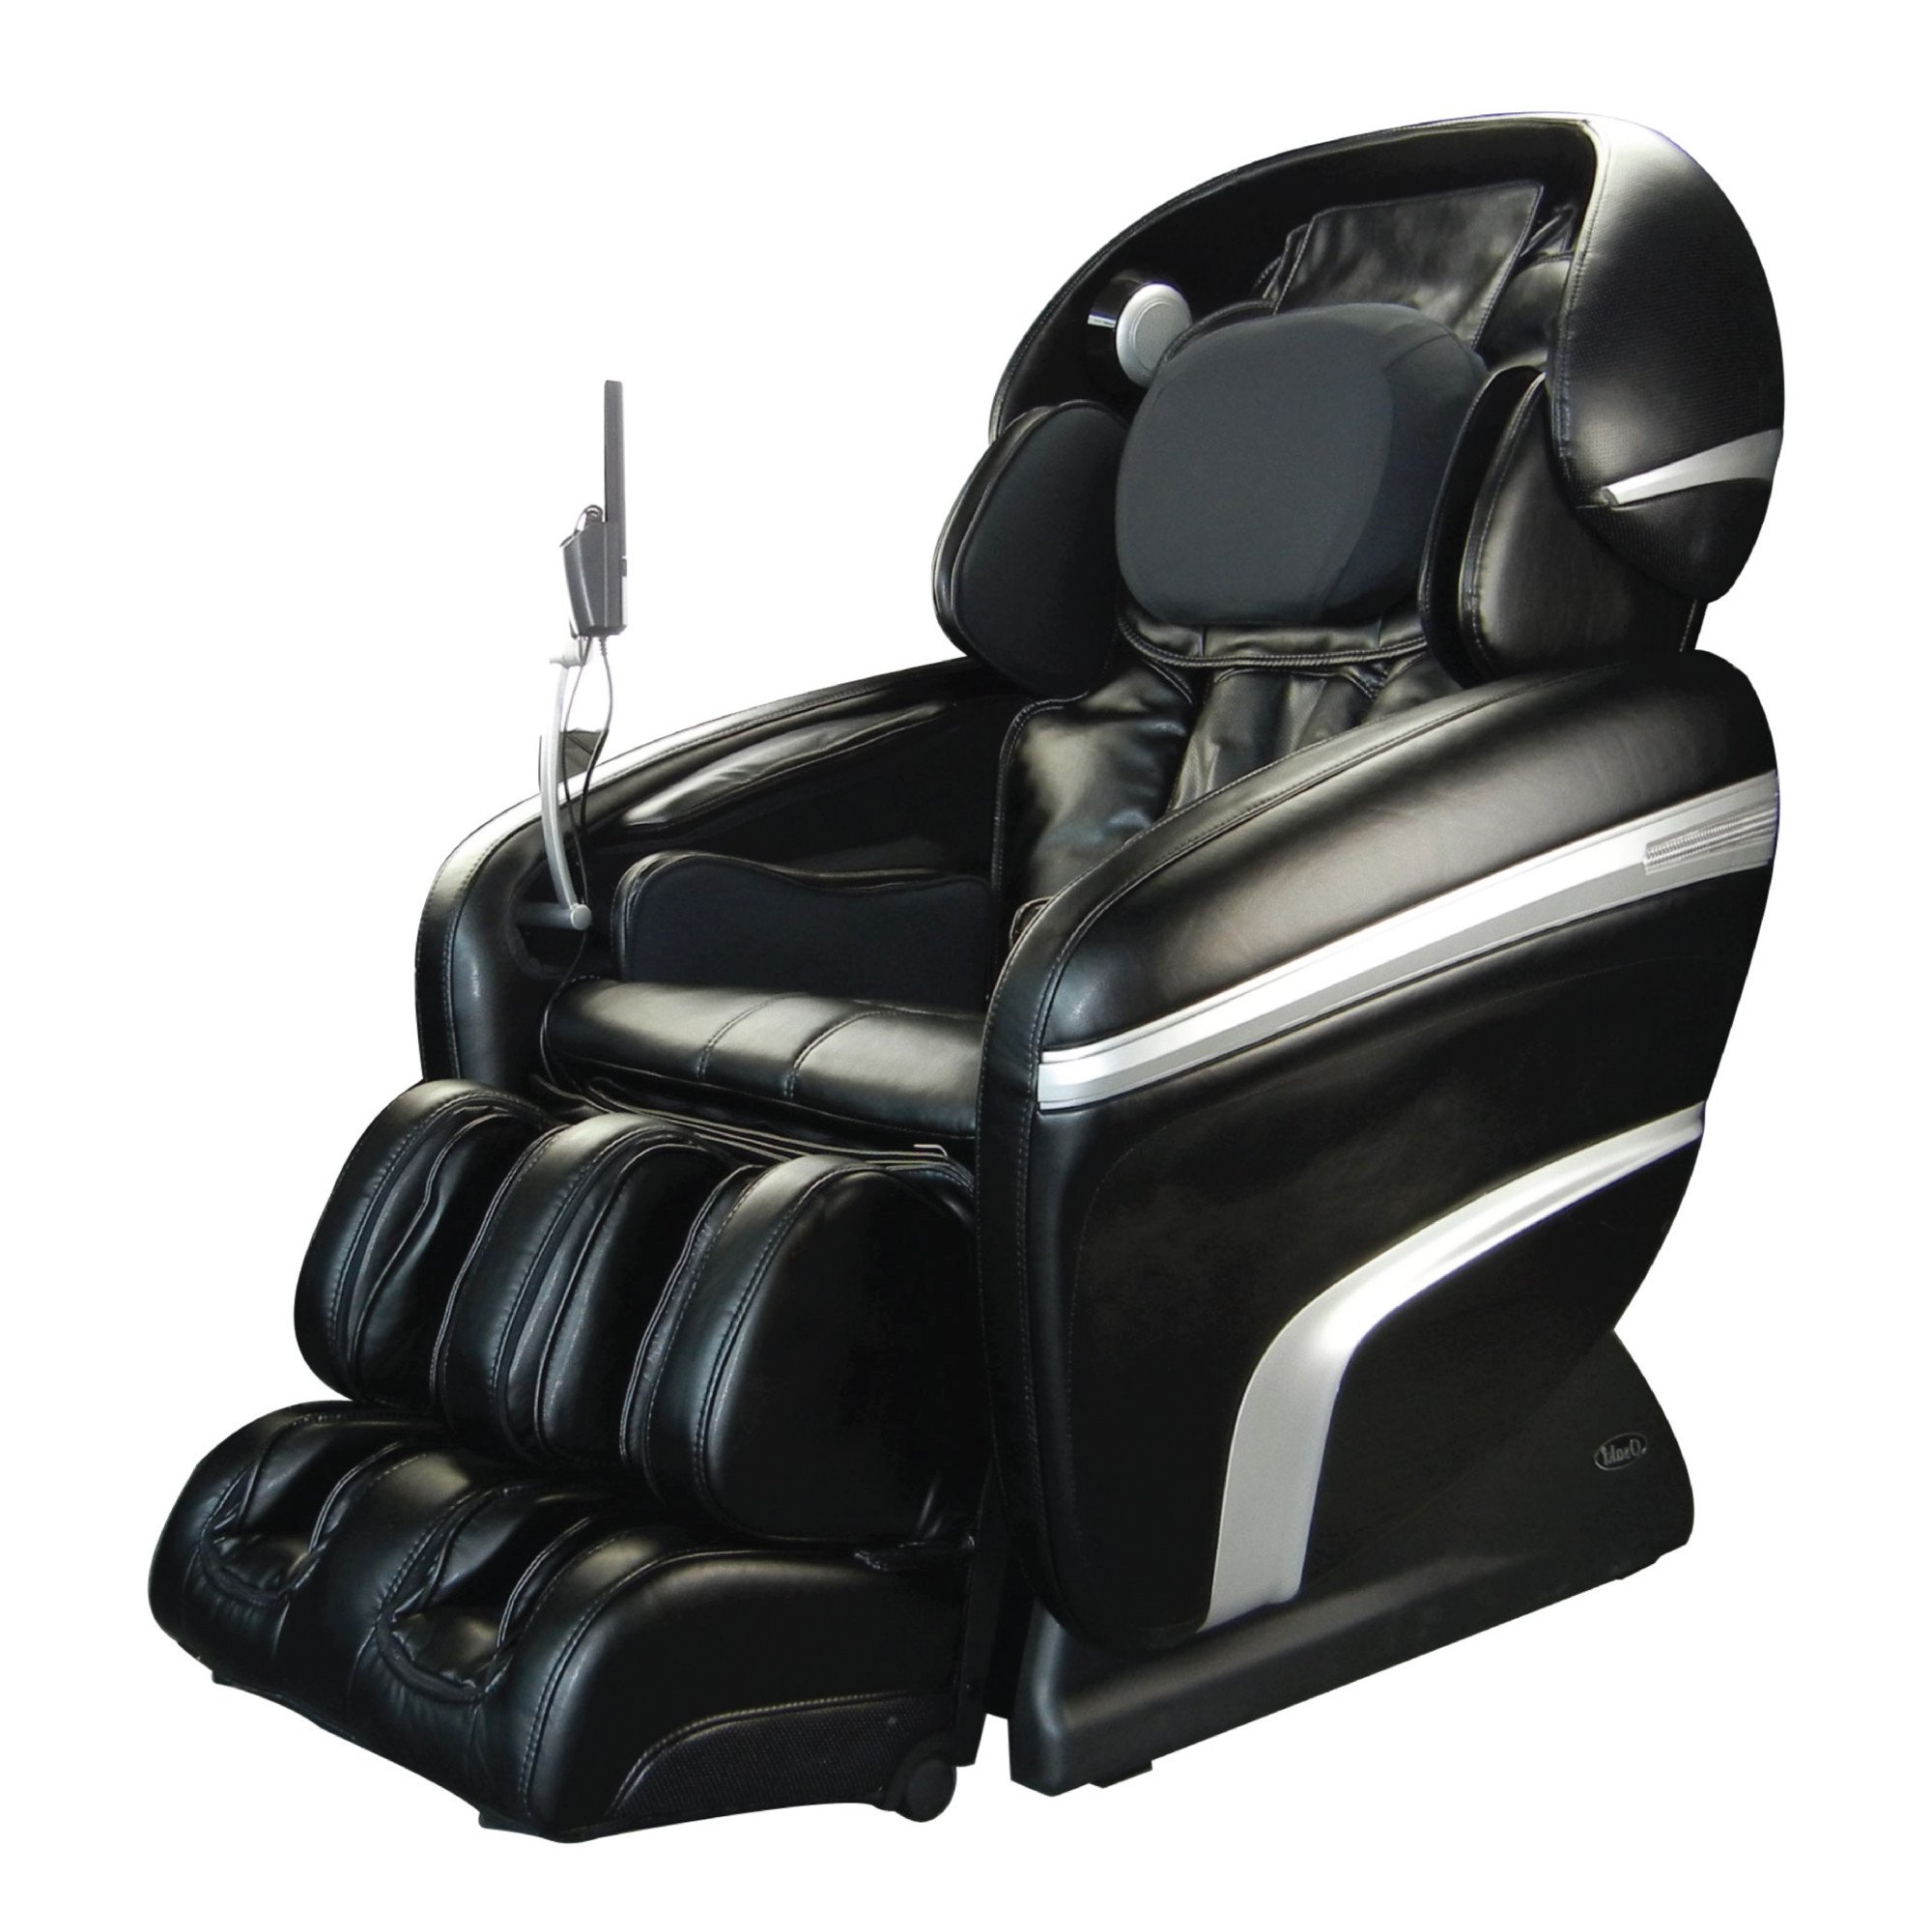 Osaki 7200CR Massage Chair - Black  - Front Angle View